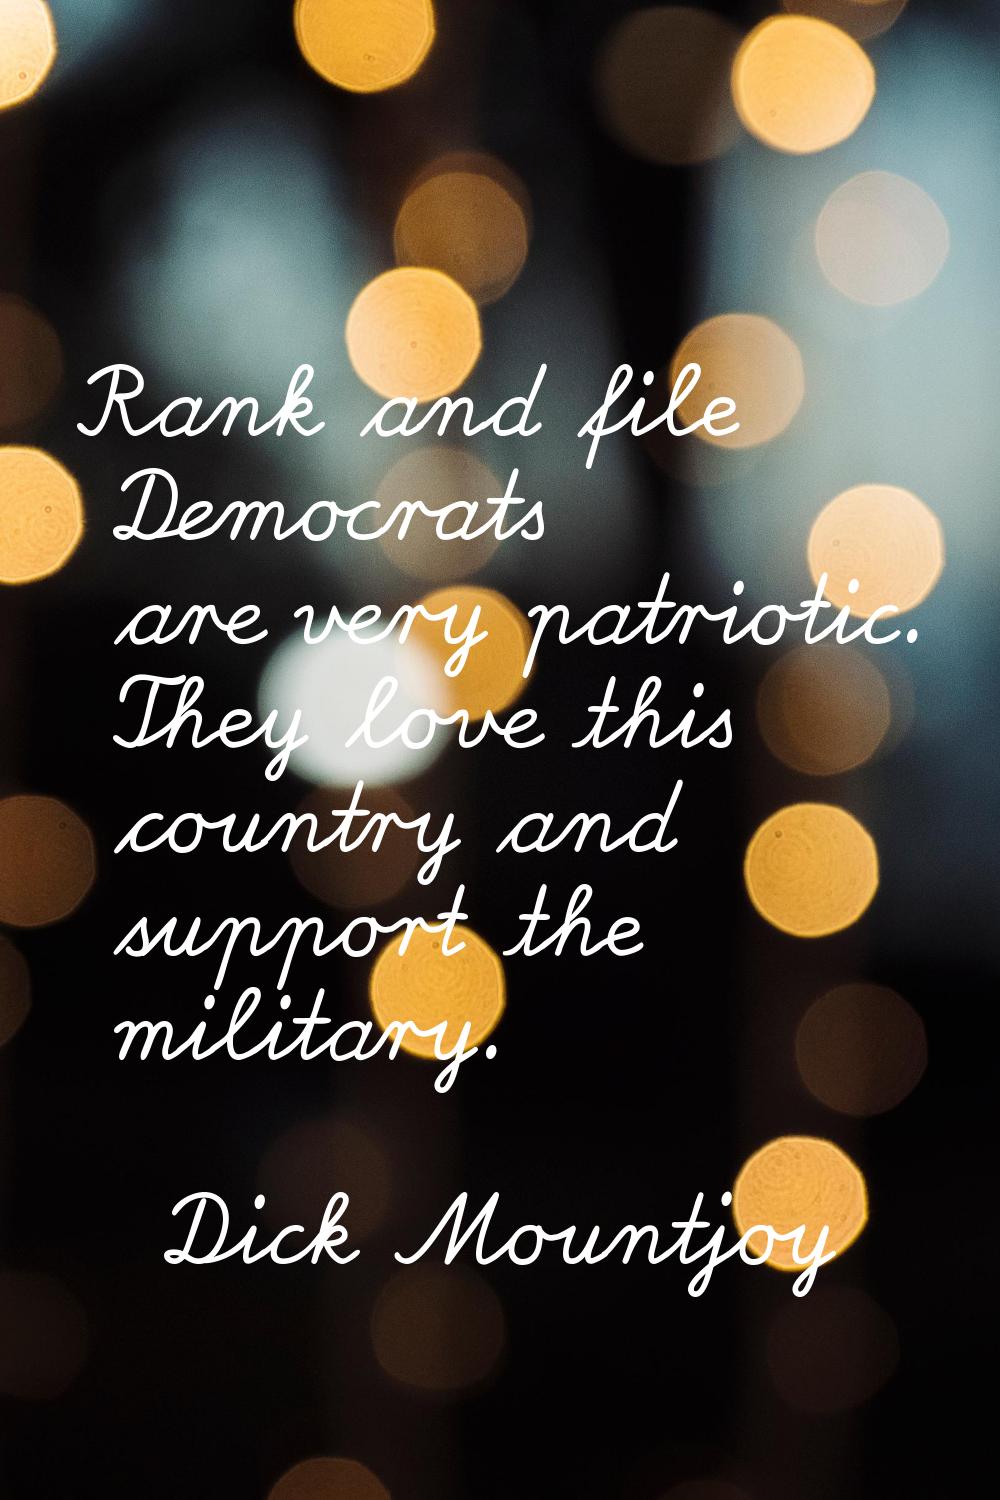 Rank and file Democrats are very patriotic. They love this country and support the military.